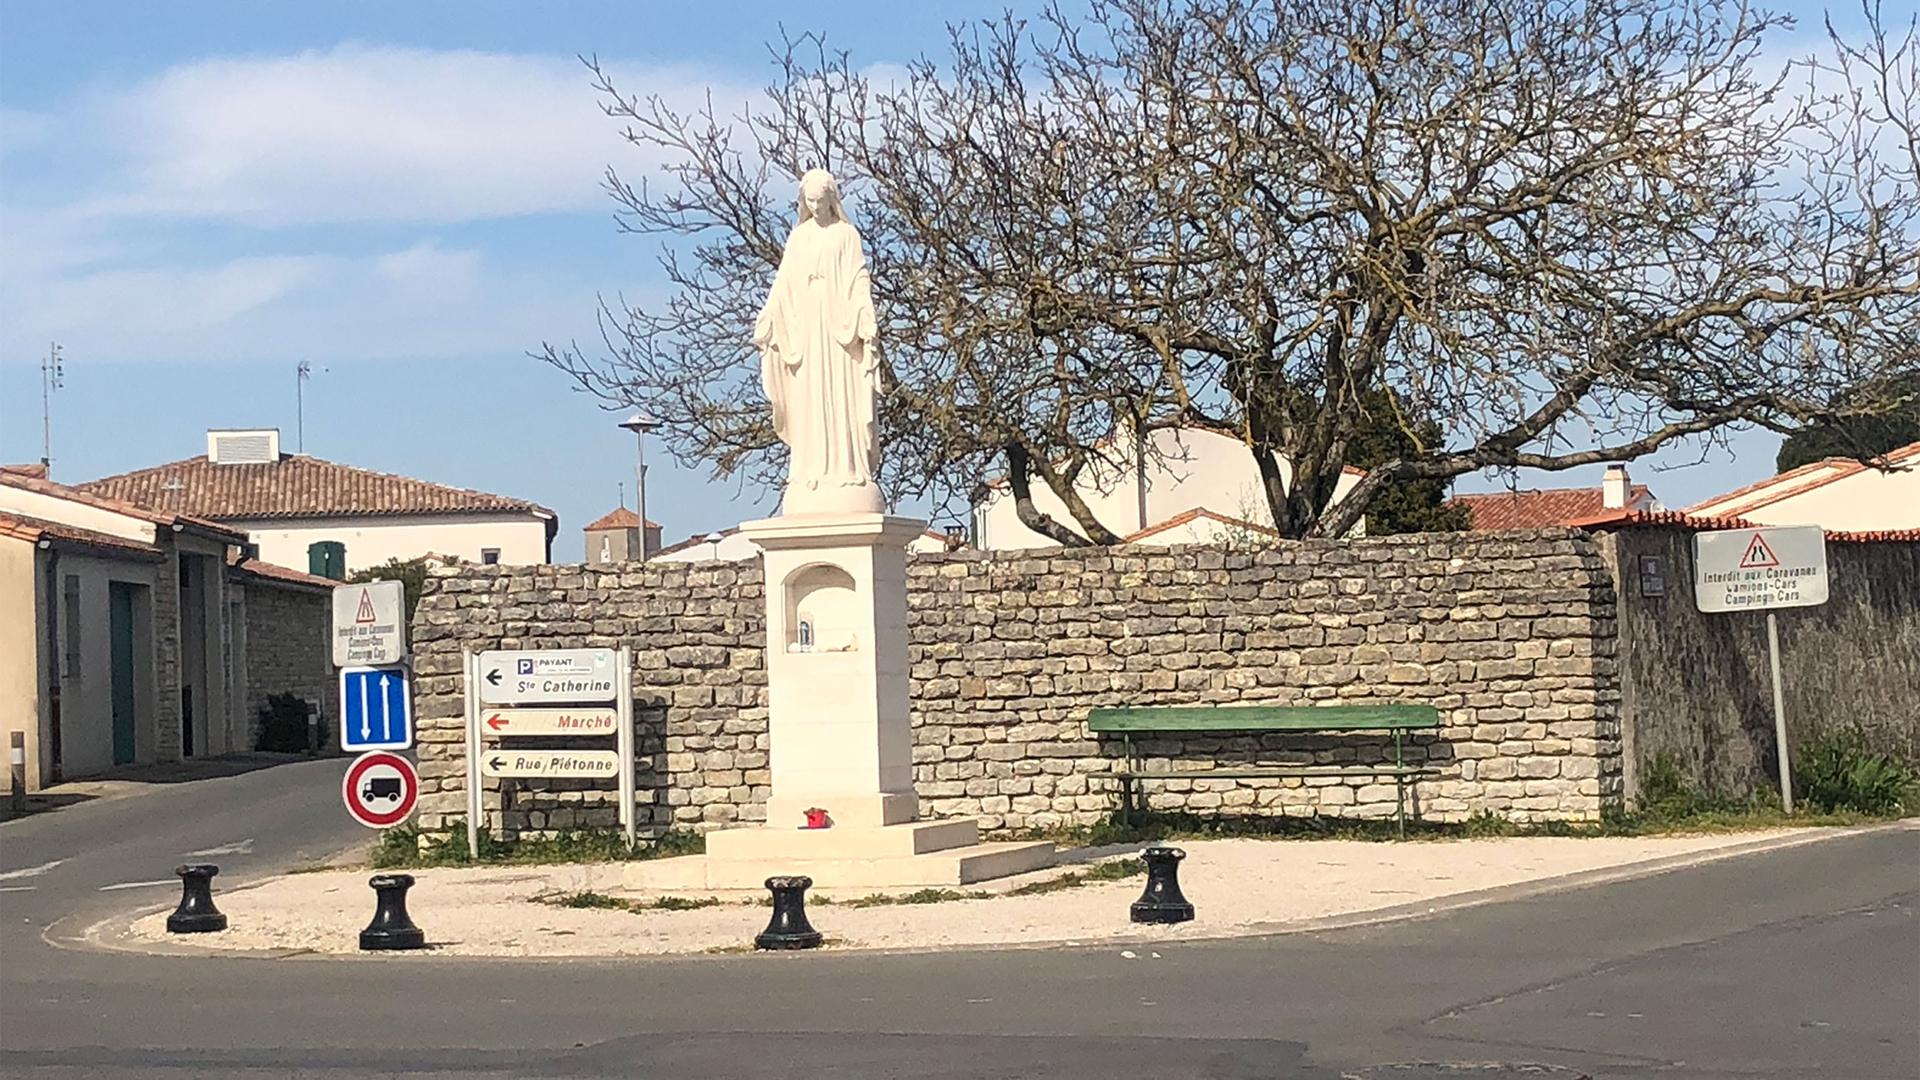 A Virgin Mary statue in a public square in France